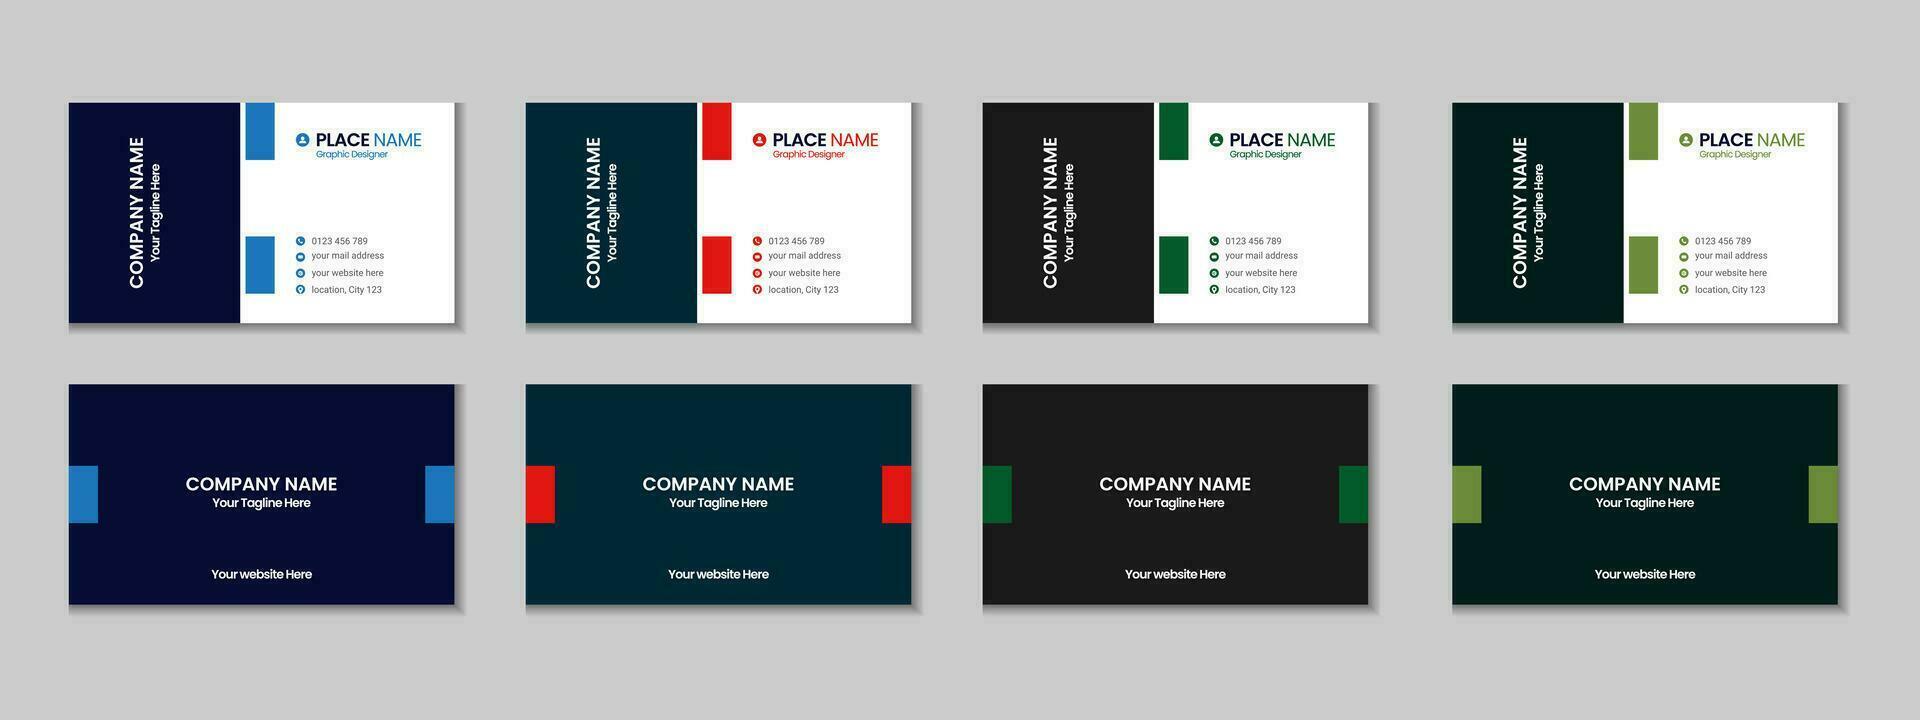 Professional business card set template design with texture and pattern, corporate visiting card, name card design with mockup vector